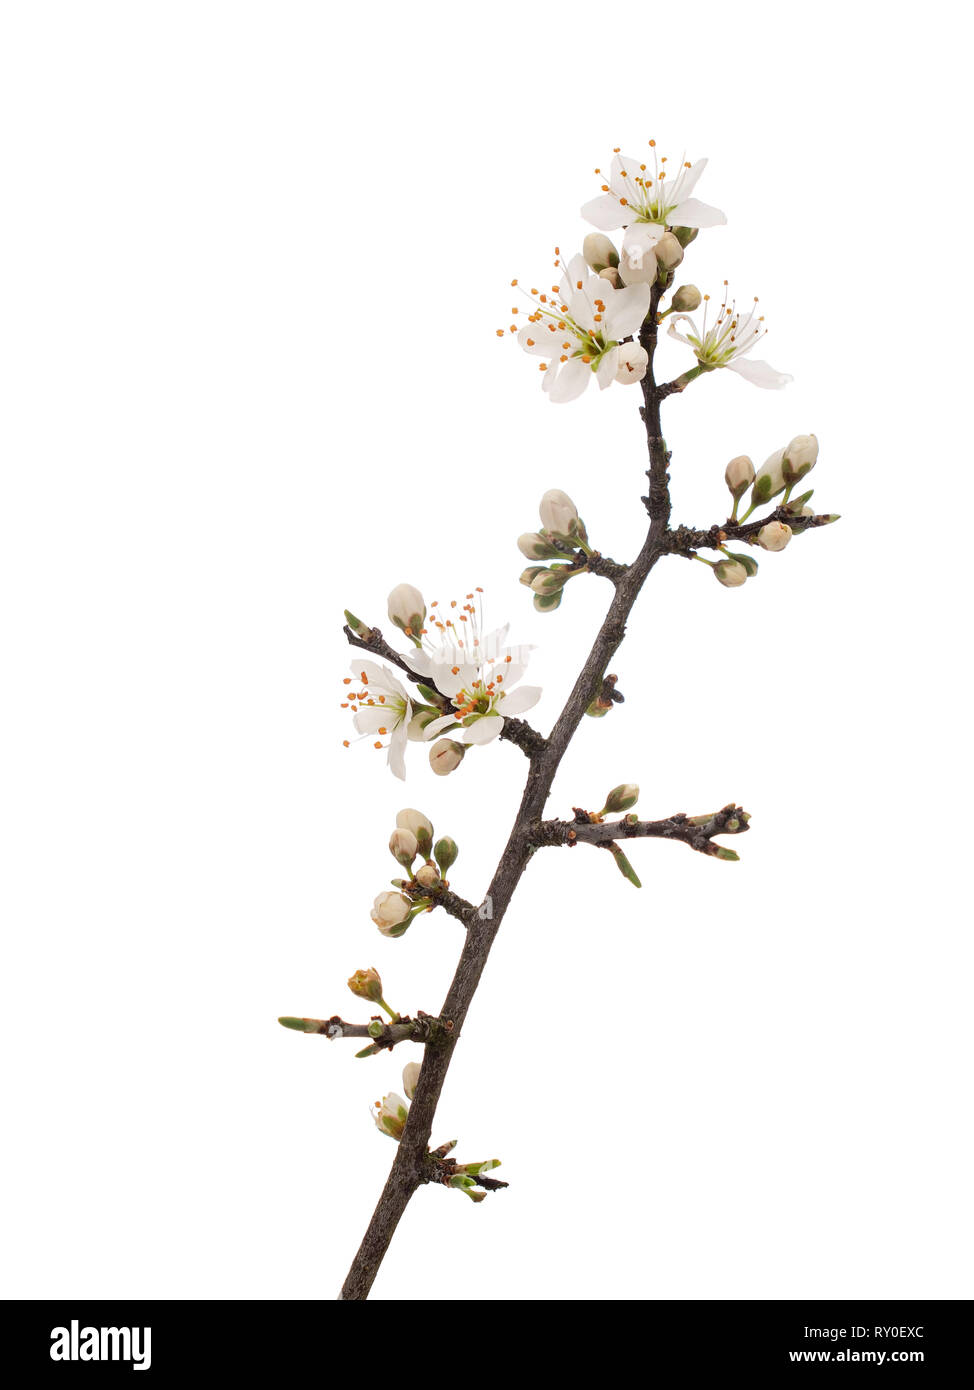 Prunus spinosa, blackthorn aka sloe blossom in springtime, isolated on white background. Delicate white flowers, close up detail. Stock Photo